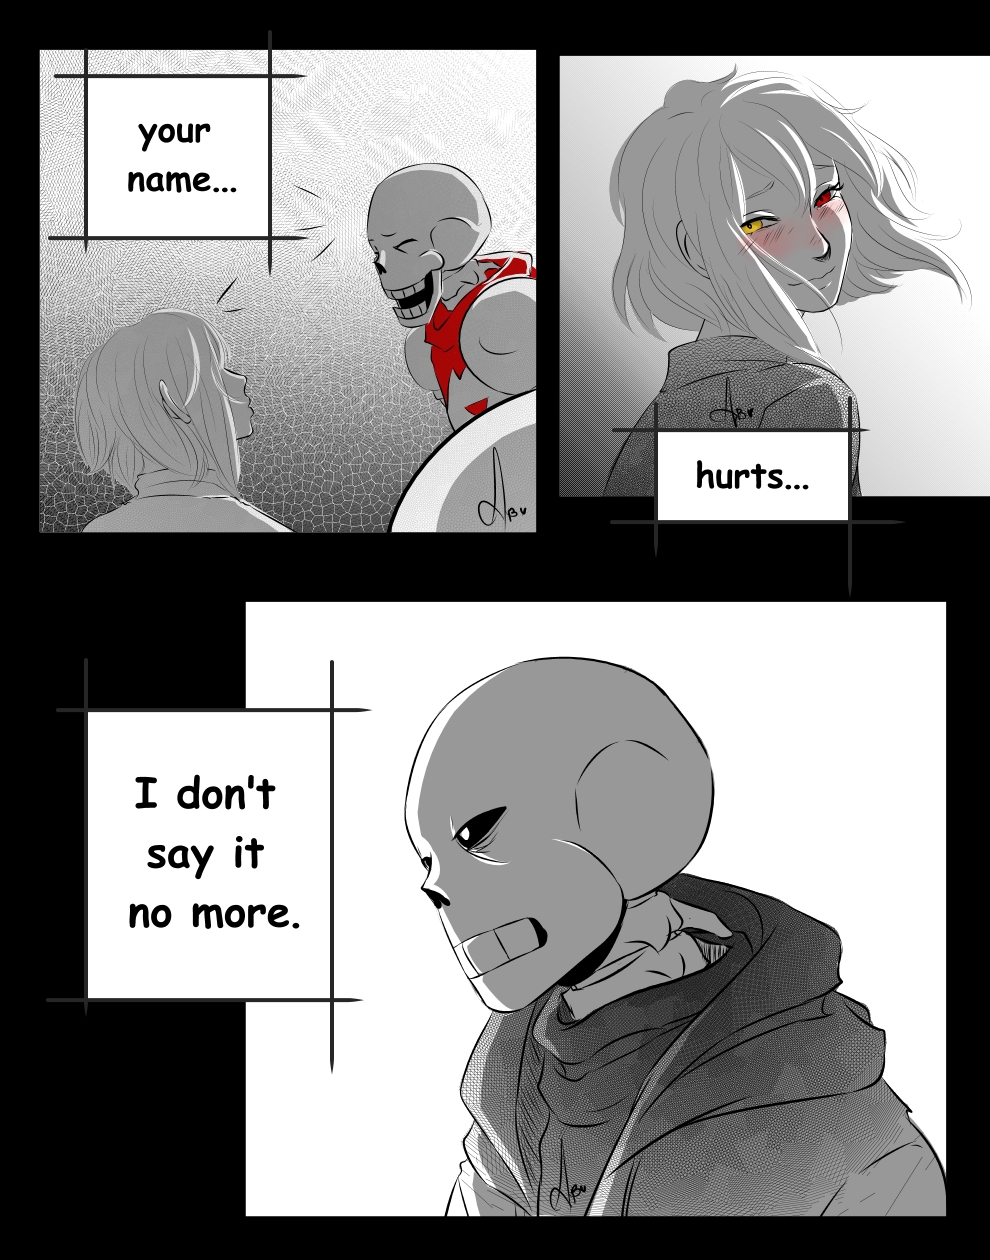 I hope my name hurts you. by AppleBets on DeviantArt